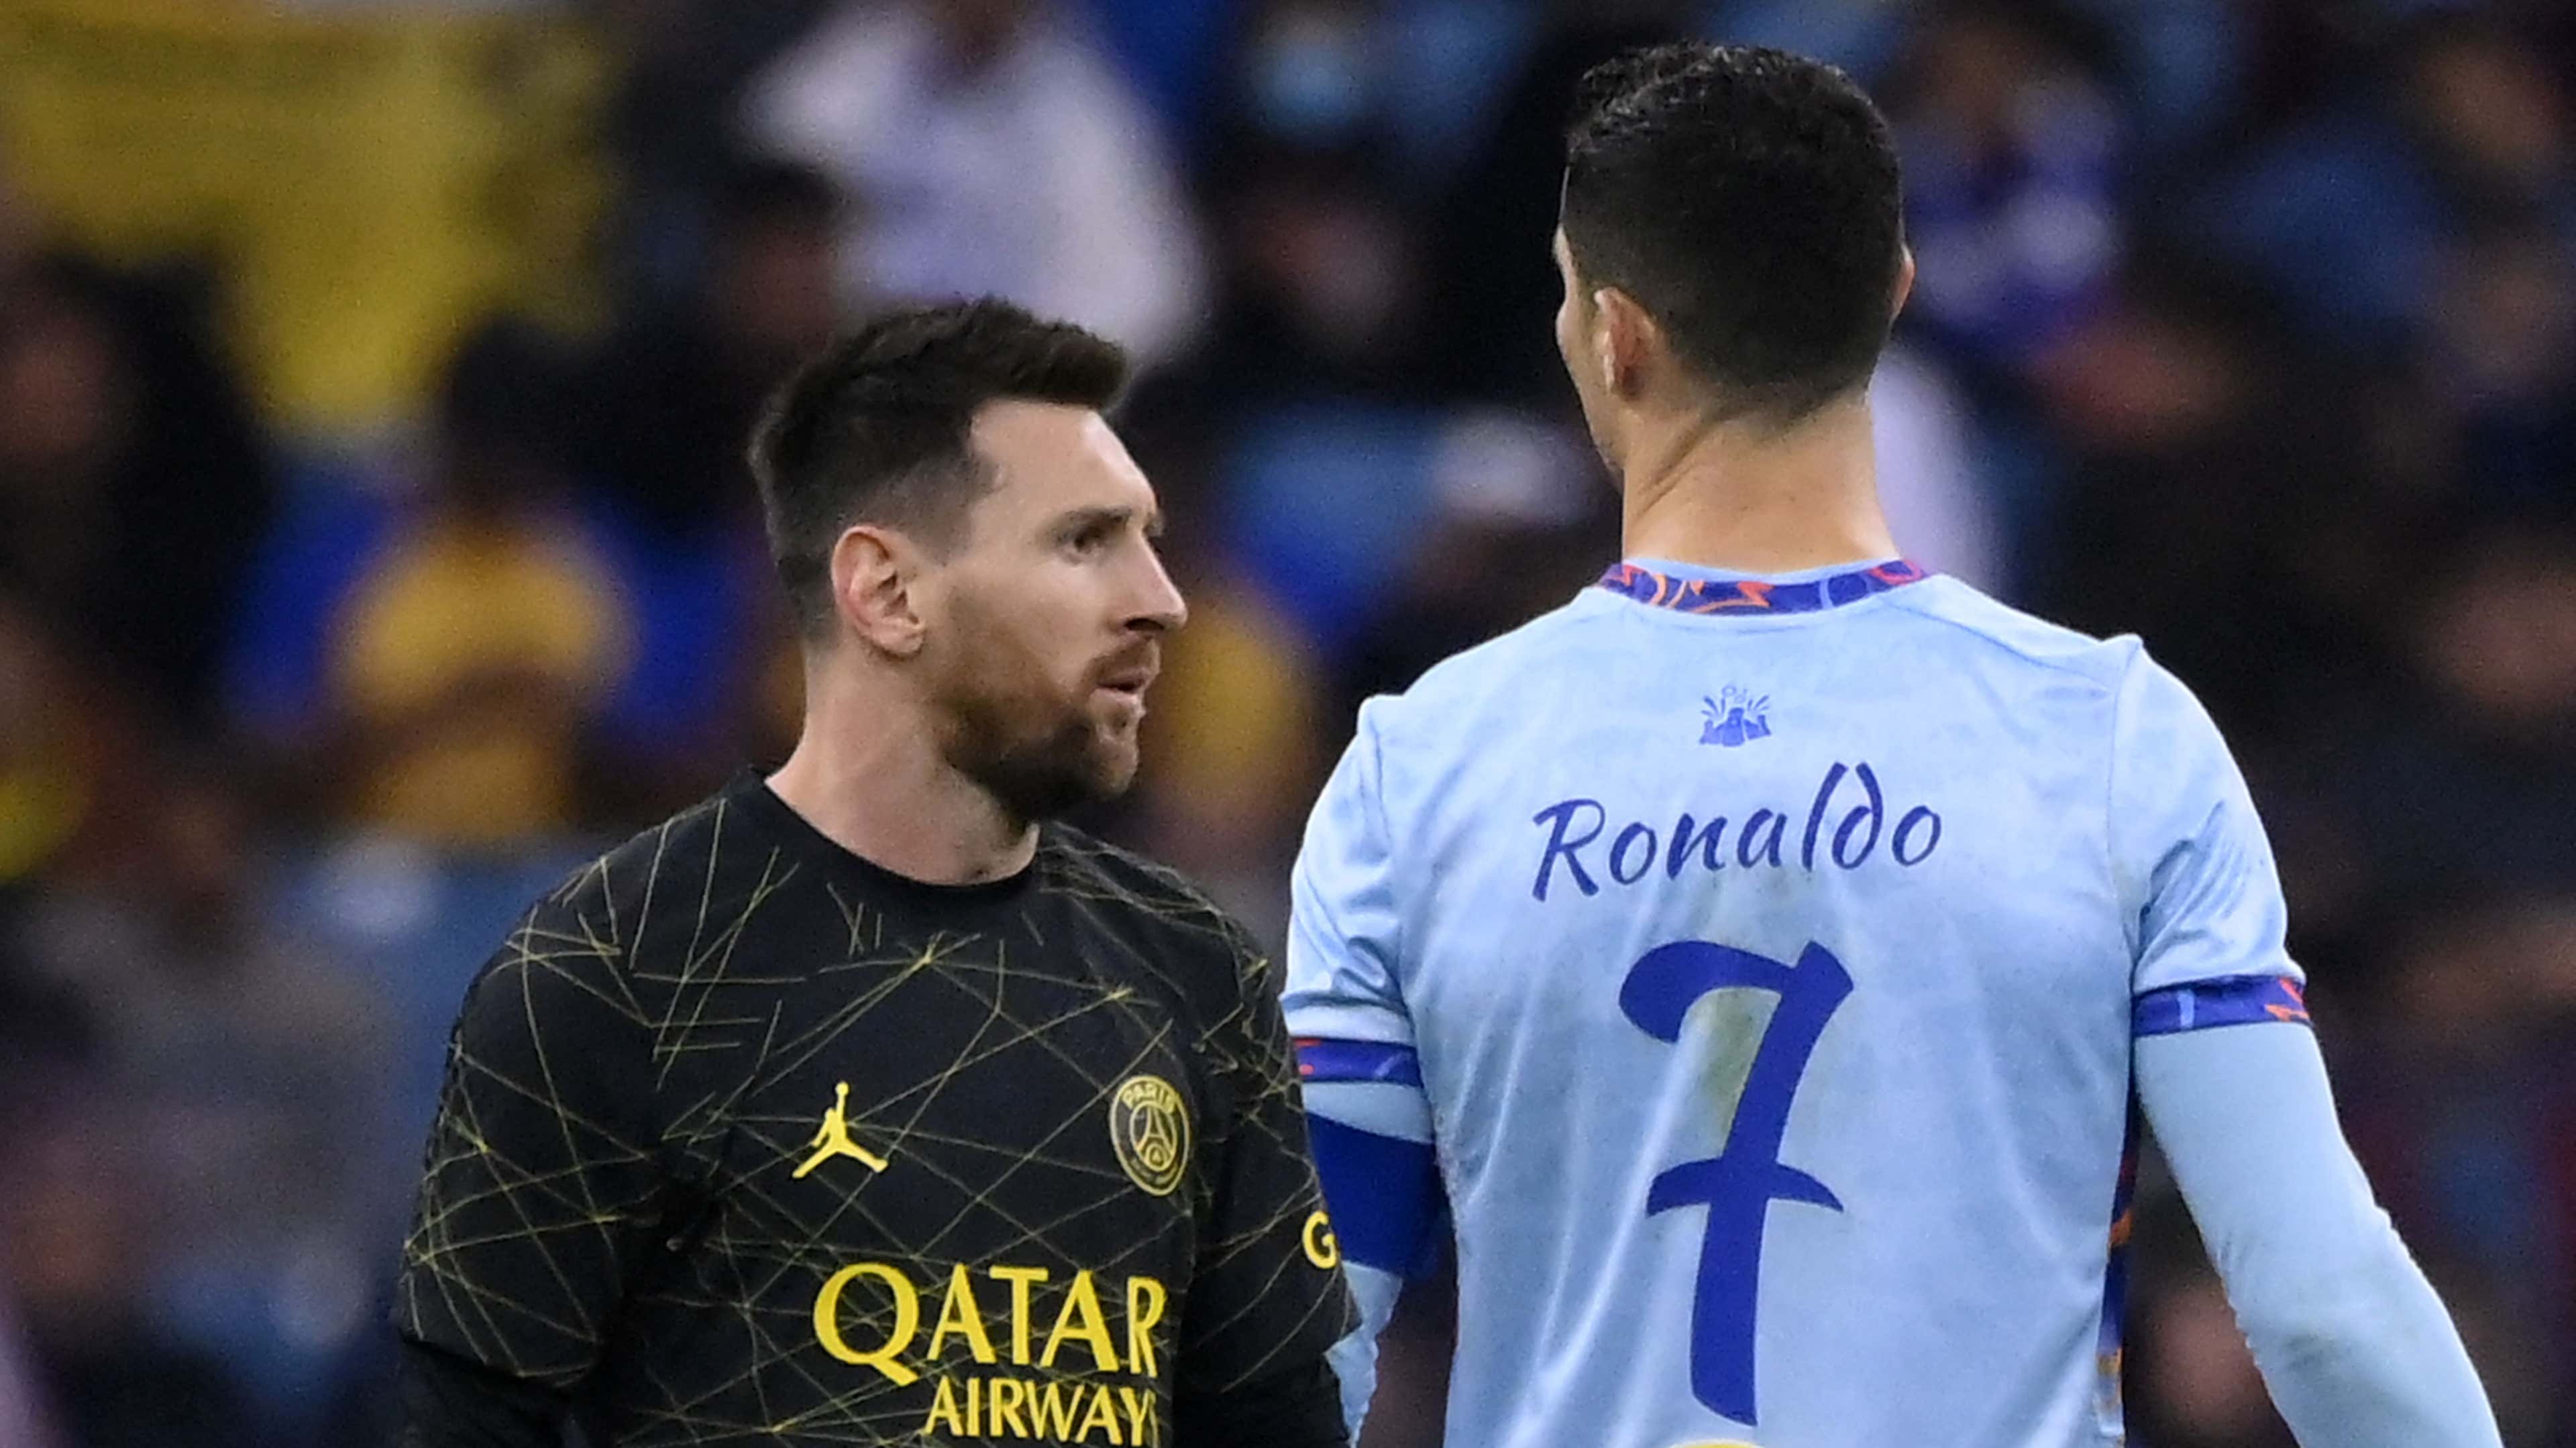 Nice to see some old friends' - Cristiano Ronaldo and Lionel Messi